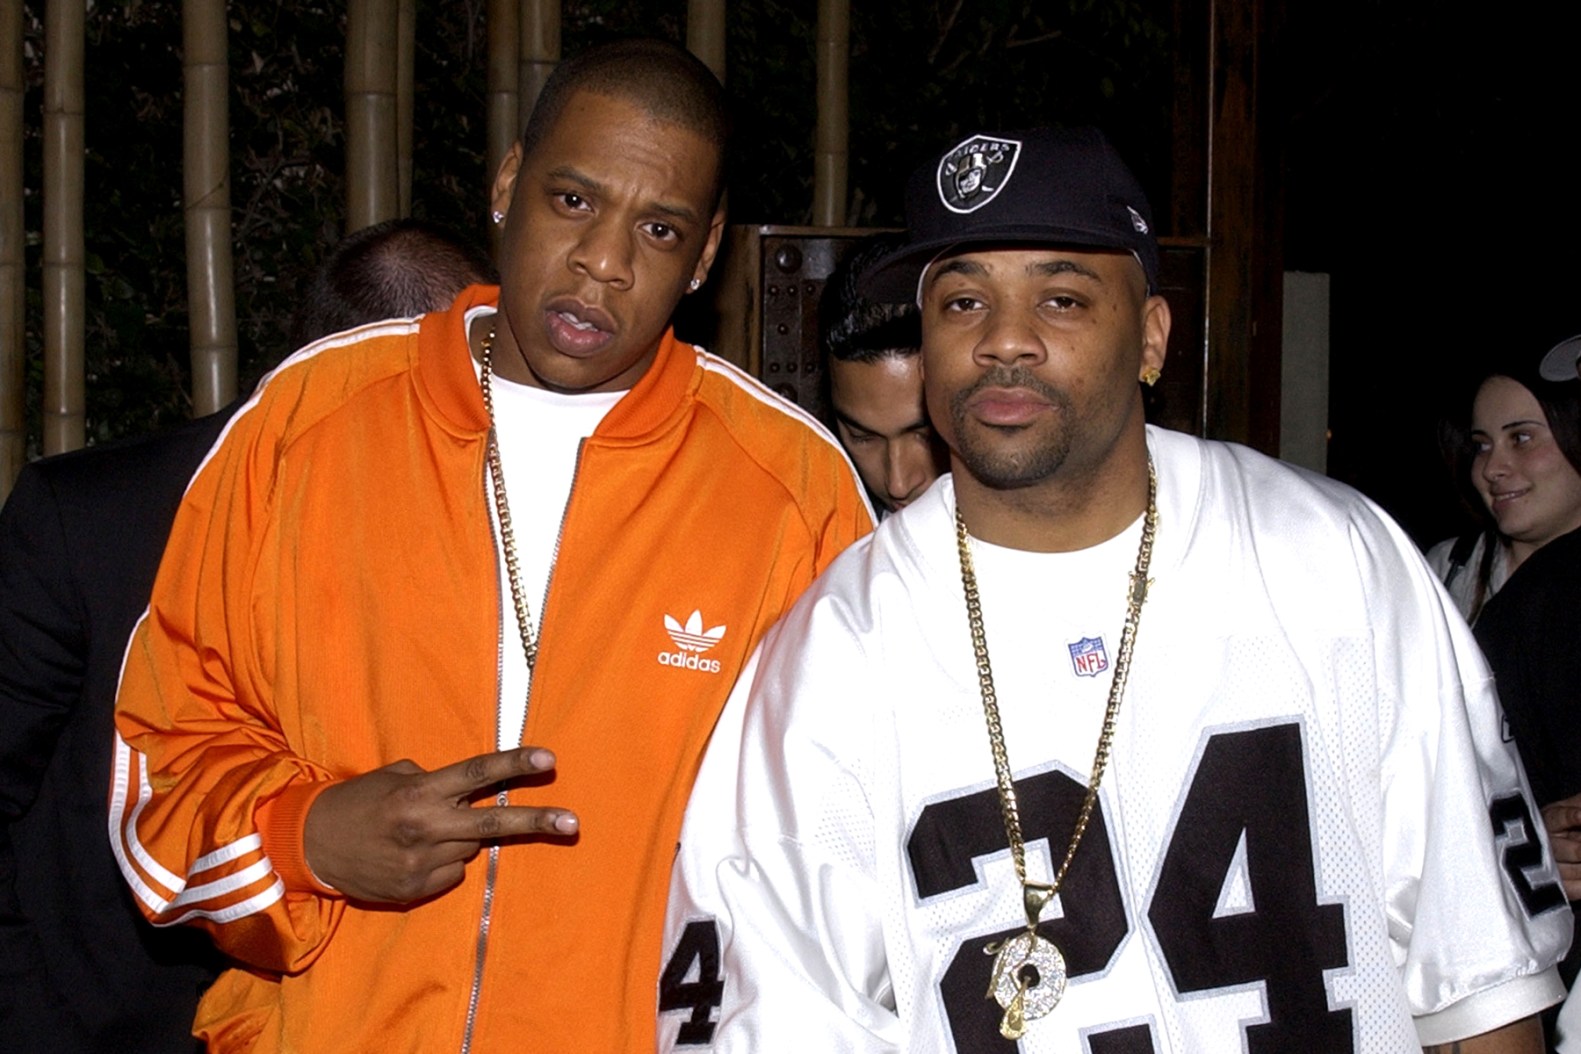 What’s Happening With Dame Dash’s Shares of Roc-A-Fella?